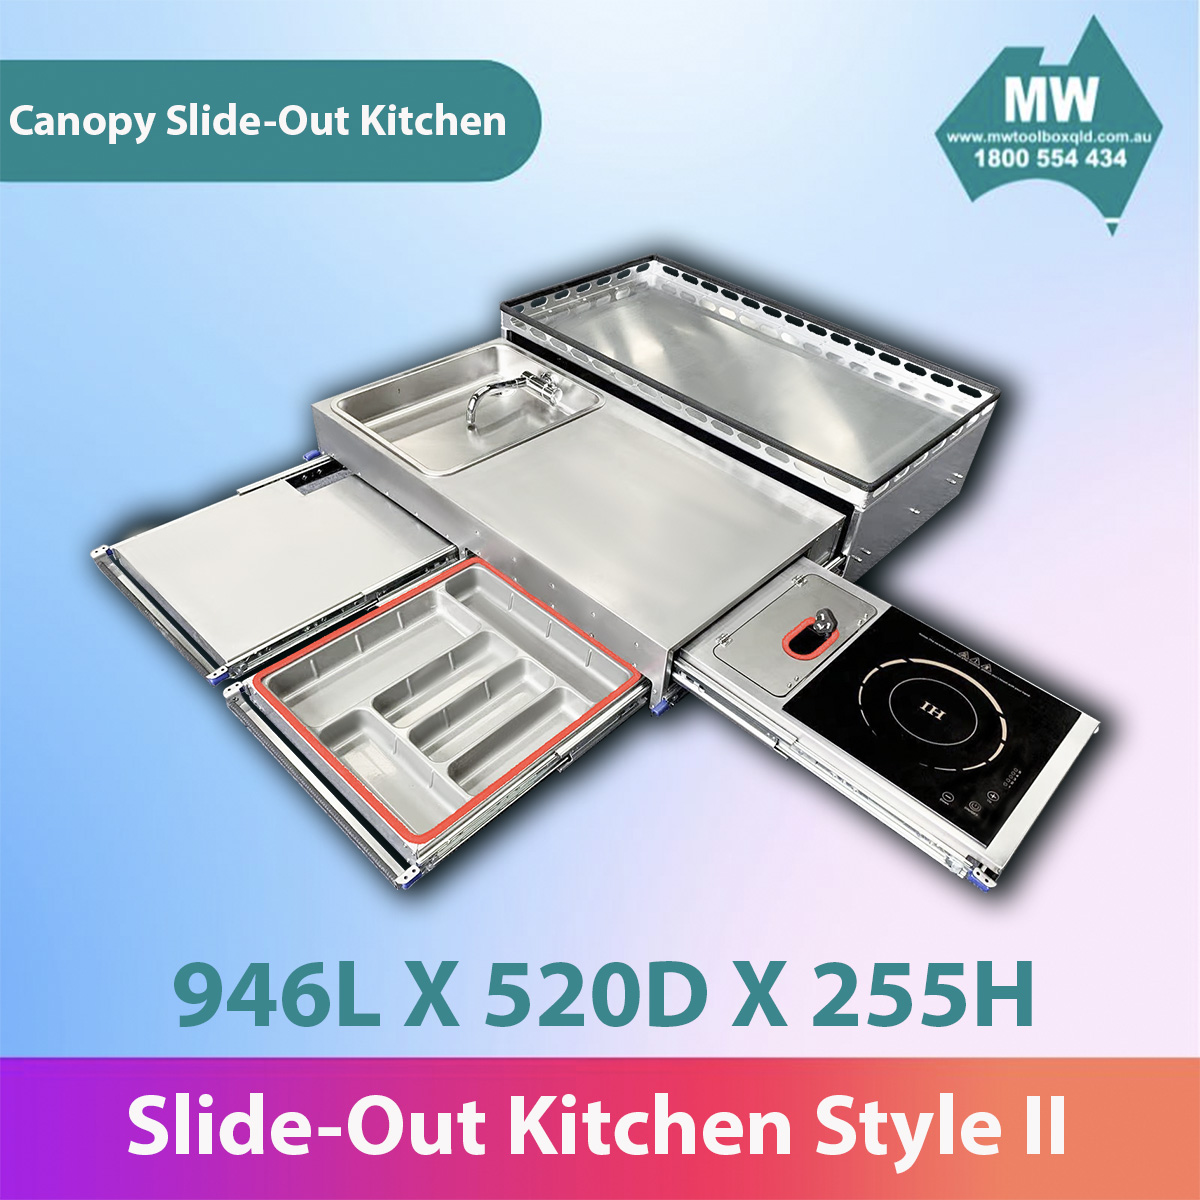 MW SLIDE OUT KITCHEN CANOPY KITCHEN STYLE II-4